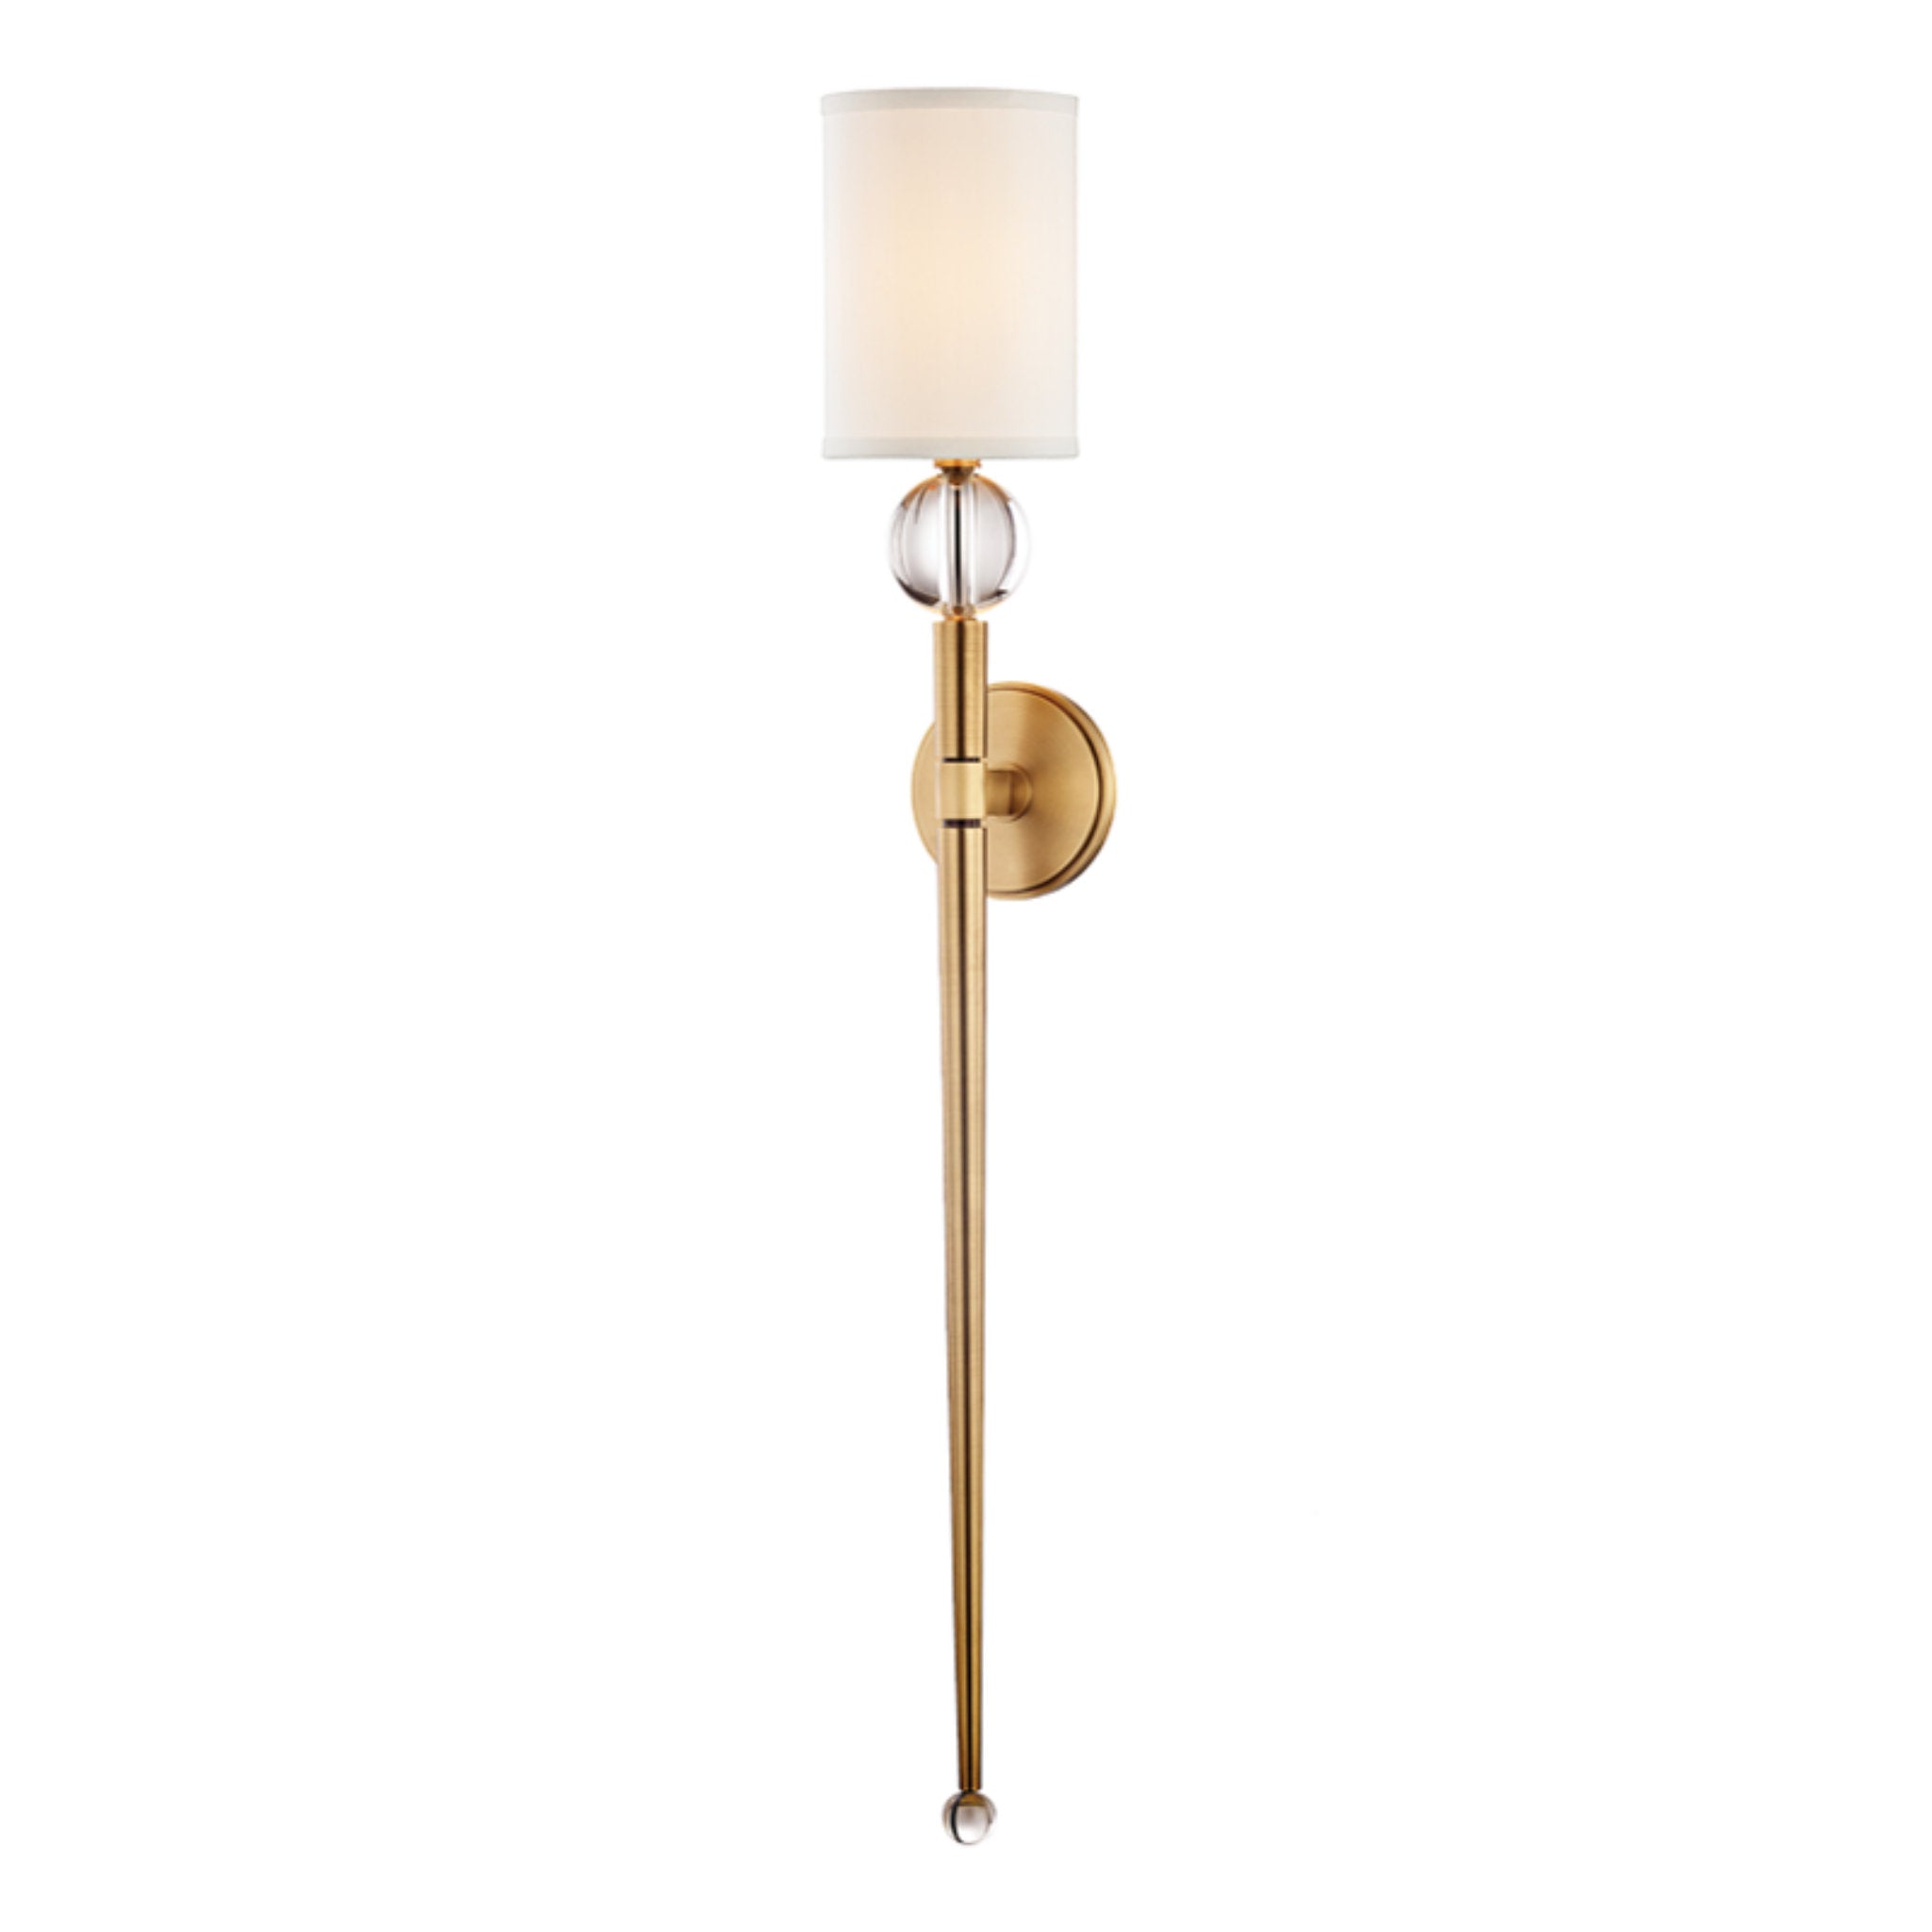 Rockland 1 Light Wall Sconce in Aged Brass